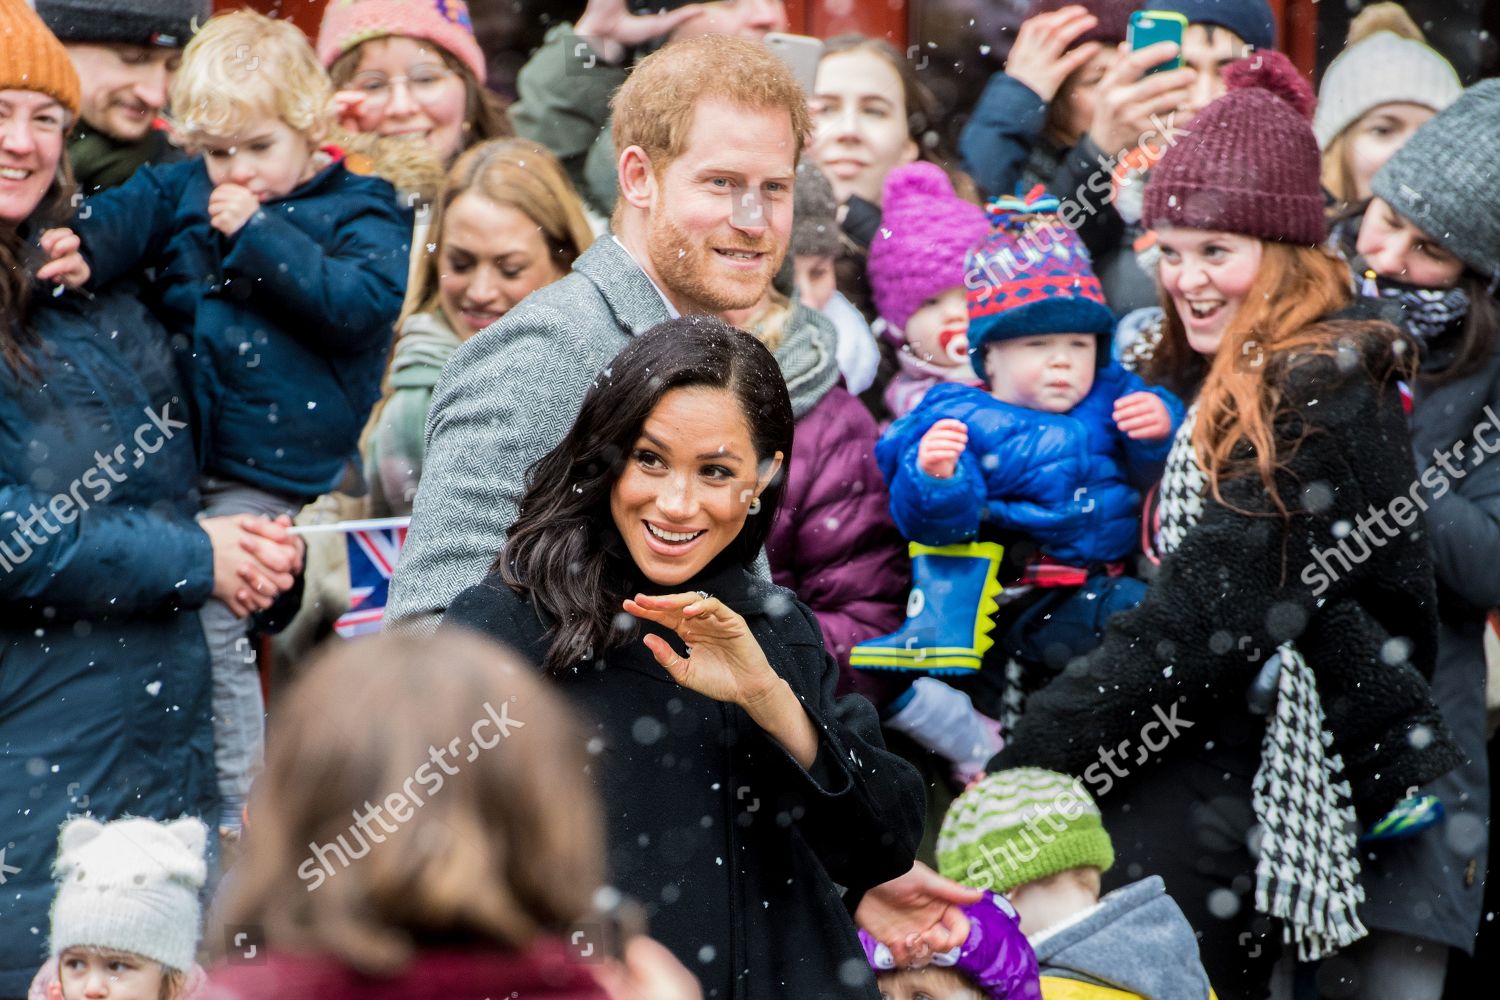 prince-harry-and-meghan-duchess-of-sussex-visit-to-bristol-uk-shutterstock-editorial-10080468j.jpg